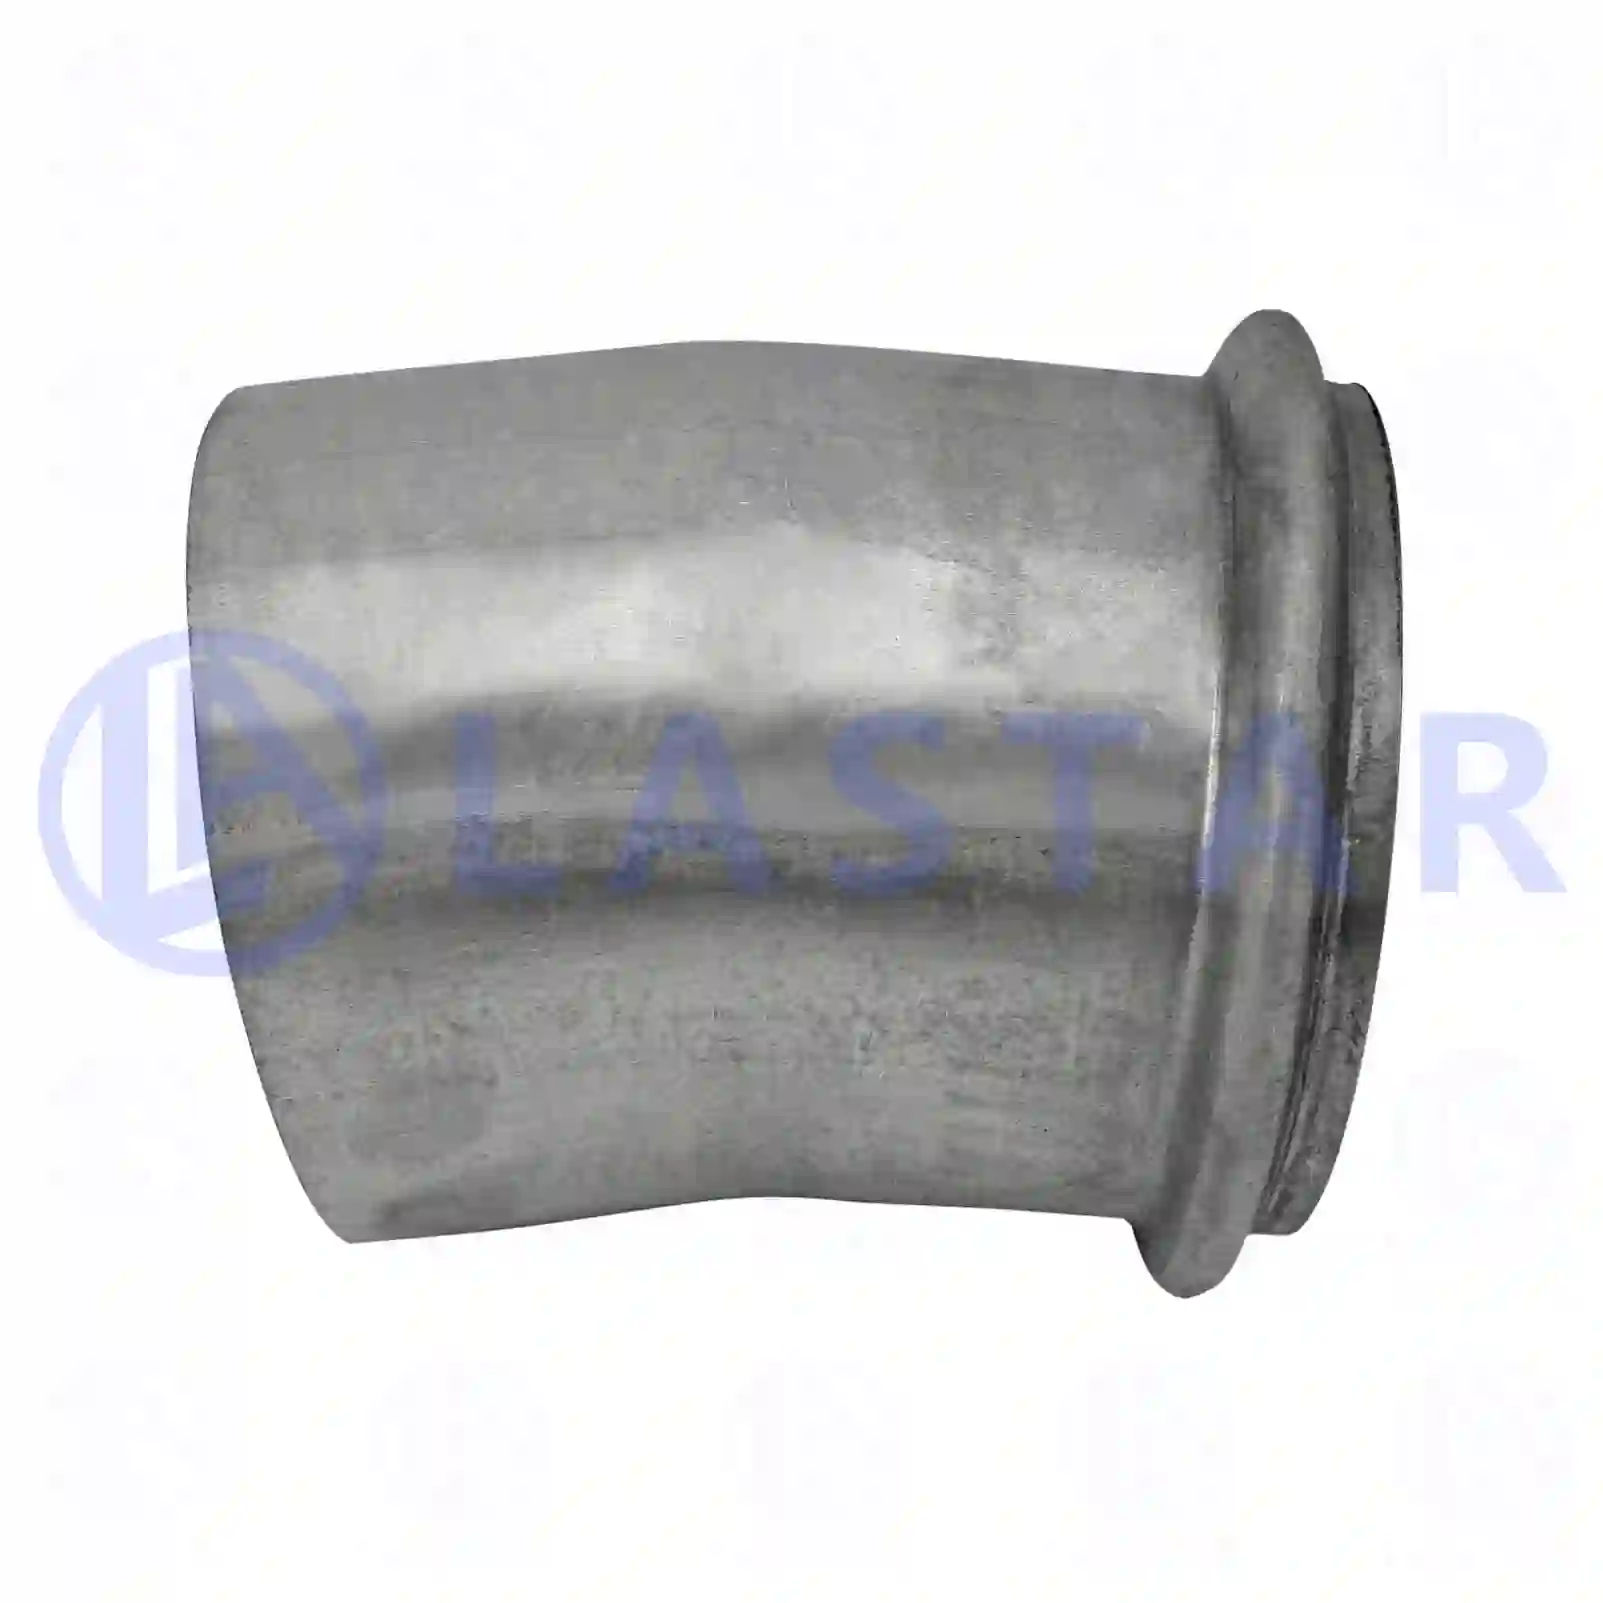 Front exhaust pipe, 77706637, 5010626109, 7401626097, 1626097, ZG10331-0008 ||  77706637 Lastar Spare Part | Truck Spare Parts, Auotomotive Spare Parts Front exhaust pipe, 77706637, 5010626109, 7401626097, 1626097, ZG10331-0008 ||  77706637 Lastar Spare Part | Truck Spare Parts, Auotomotive Spare Parts